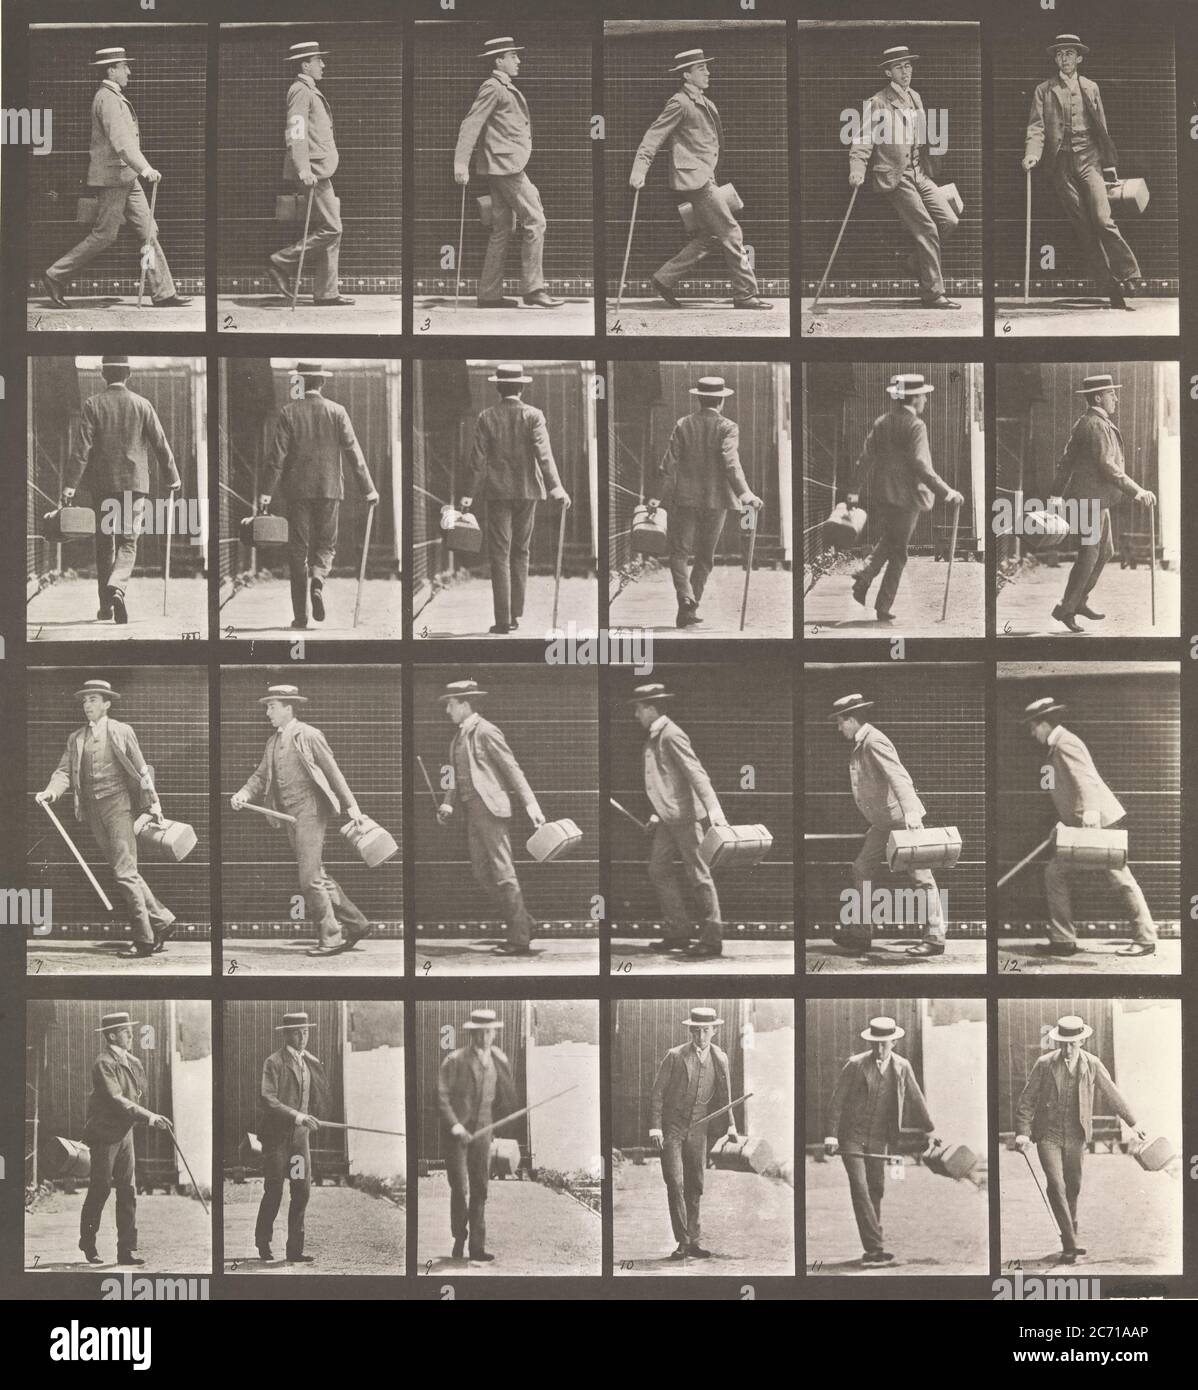 Animal Locomotion. An Electro-Photographic Investigation... of Animal Movements. Commenced 1872 - Completed 1885. Volume VII, Men and Woman (Draped) Miscellaneous Subjects, 1880s. Stock Photo